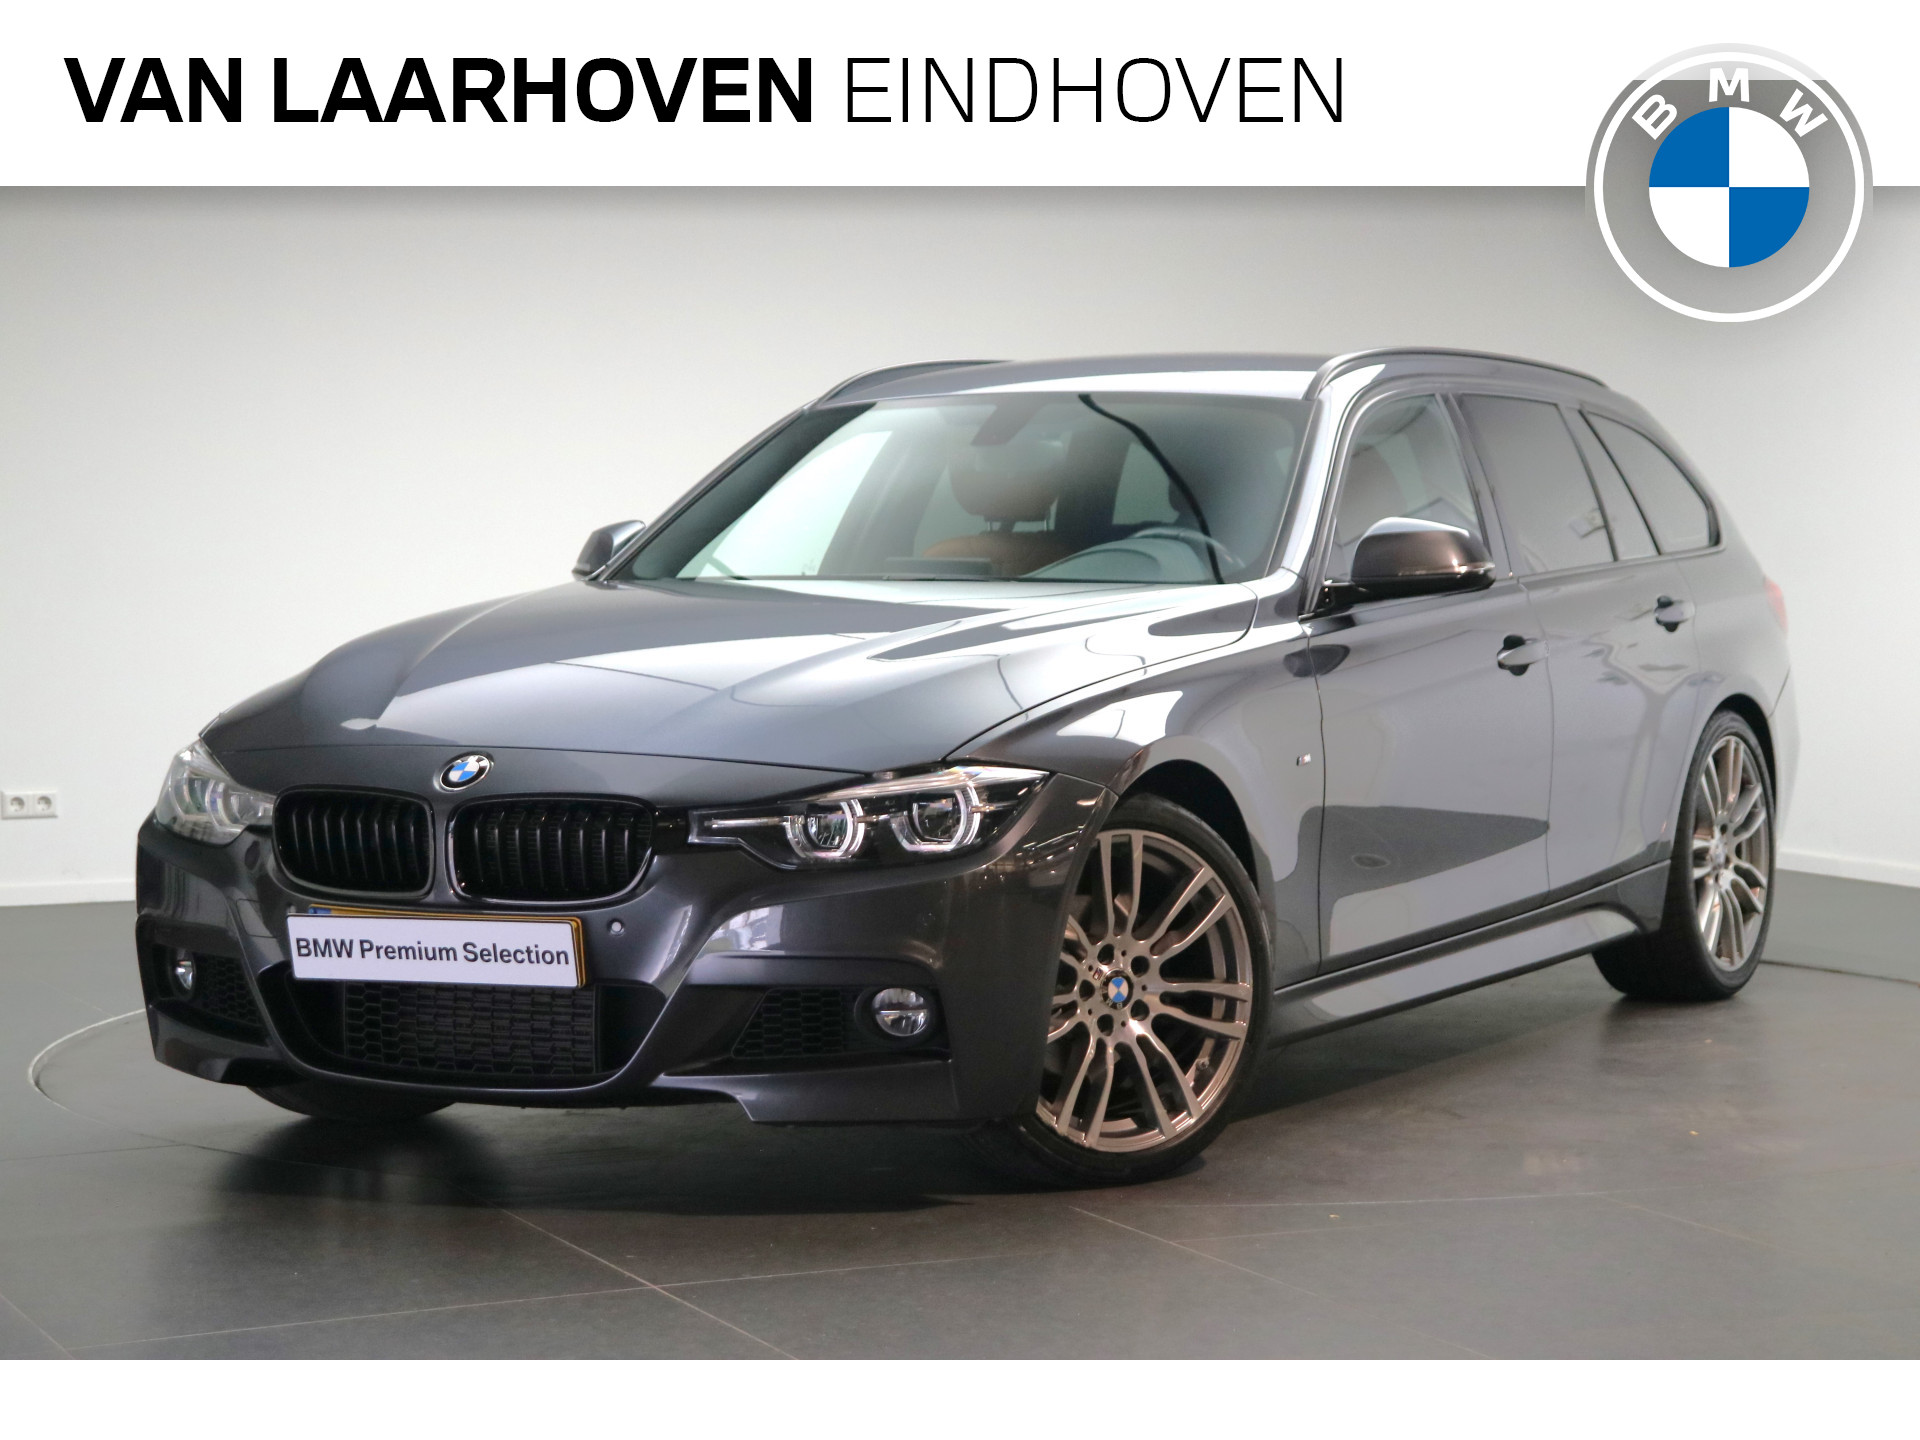 BMW 3 Serie Touring 318i Executive M Sport Automaat / Sportstoelen / Stoelverwarming / PDC / LED / Navigatie Professional / Airconditioning / Cruise Control bij viaBOVAG.nl